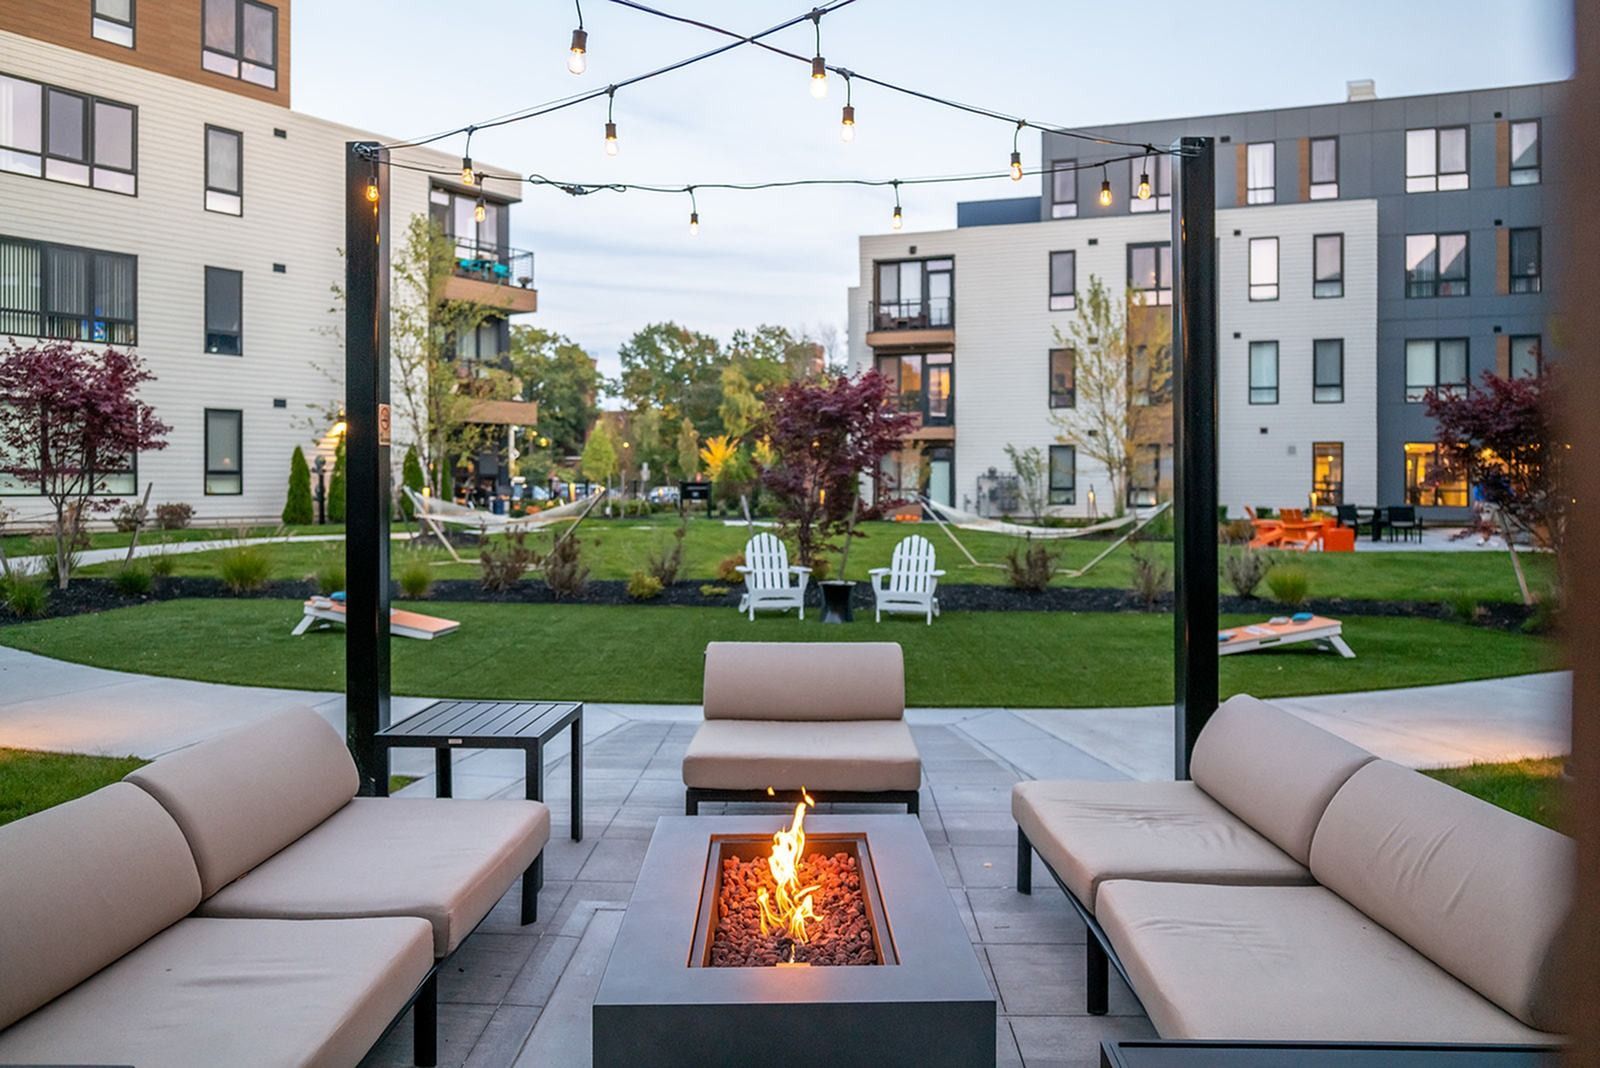 West End Yards outdoor lounge with fire pit and green lawn.